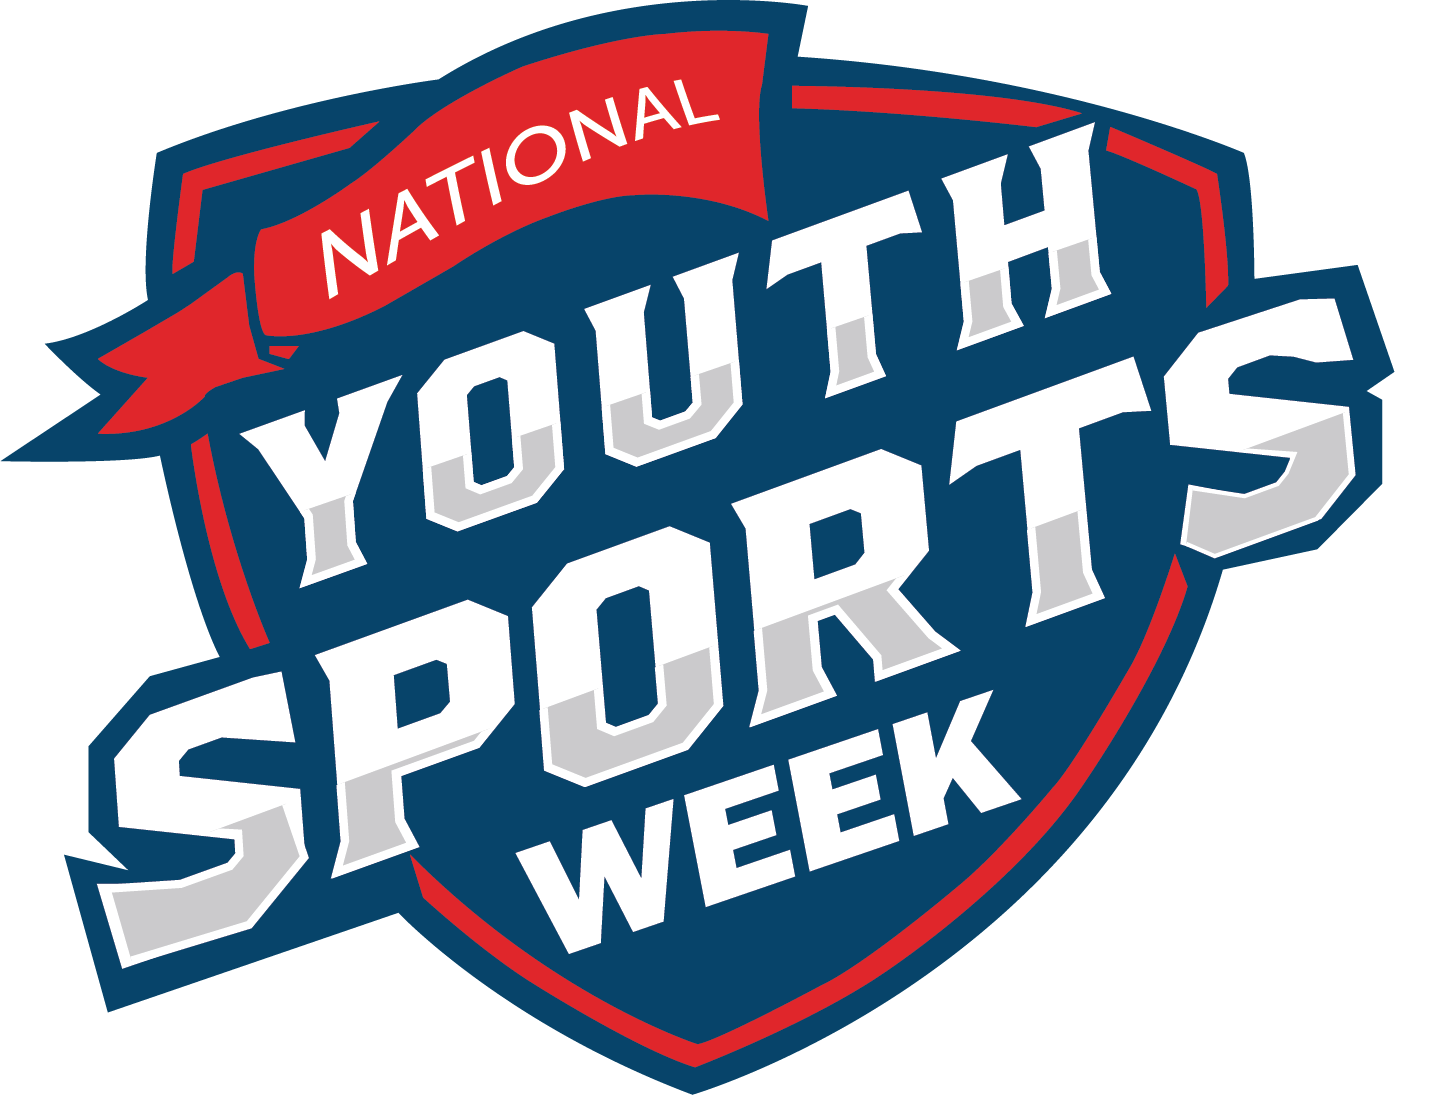 Join us for National Youth Sports Week on October 24 - 29, 2022. Our goal...